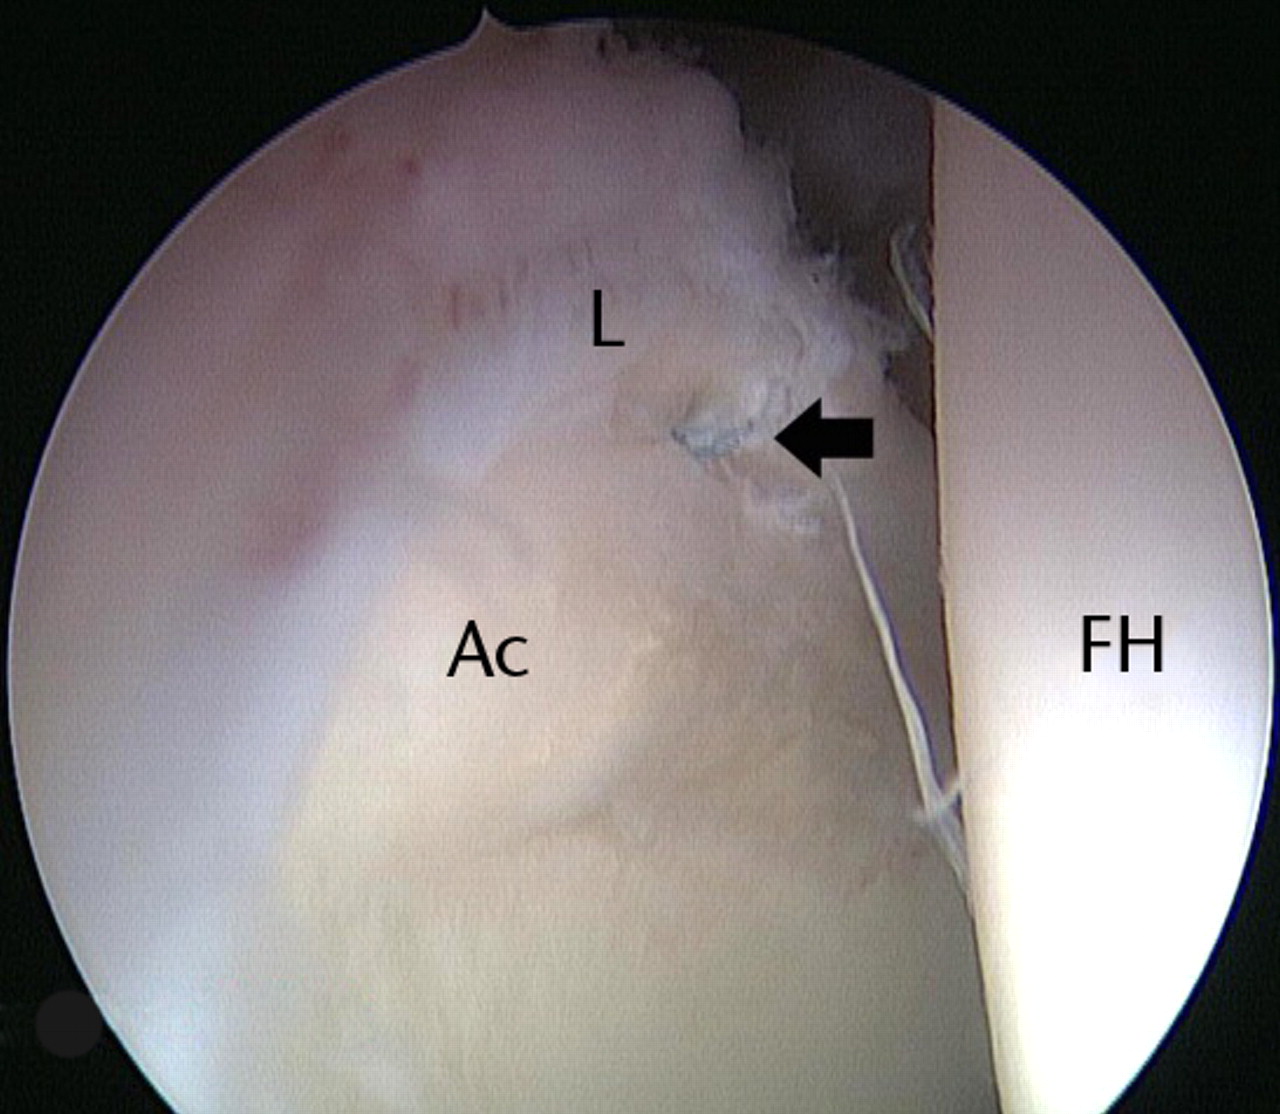 Figs. 8a - 8b 
          
            Figure 8a – arthroscopic image of
a successful labral repair with use of the vertical mattress technique
leaving the articular edge of the labrum free, with the suture barely
visible (arrow). Figure 8b – arthroscopic image after an unsuccessful
labral repair (cinch stitch technique) in which the suture cut through
the labrum, showing the final appearance of debridement of the anterosuperior
labrum (short arrow). Acetabular chondroplasty was also performed
in that case (long arrow) (L, labrum; FH, femoral head; Ac, acetabulum).
        